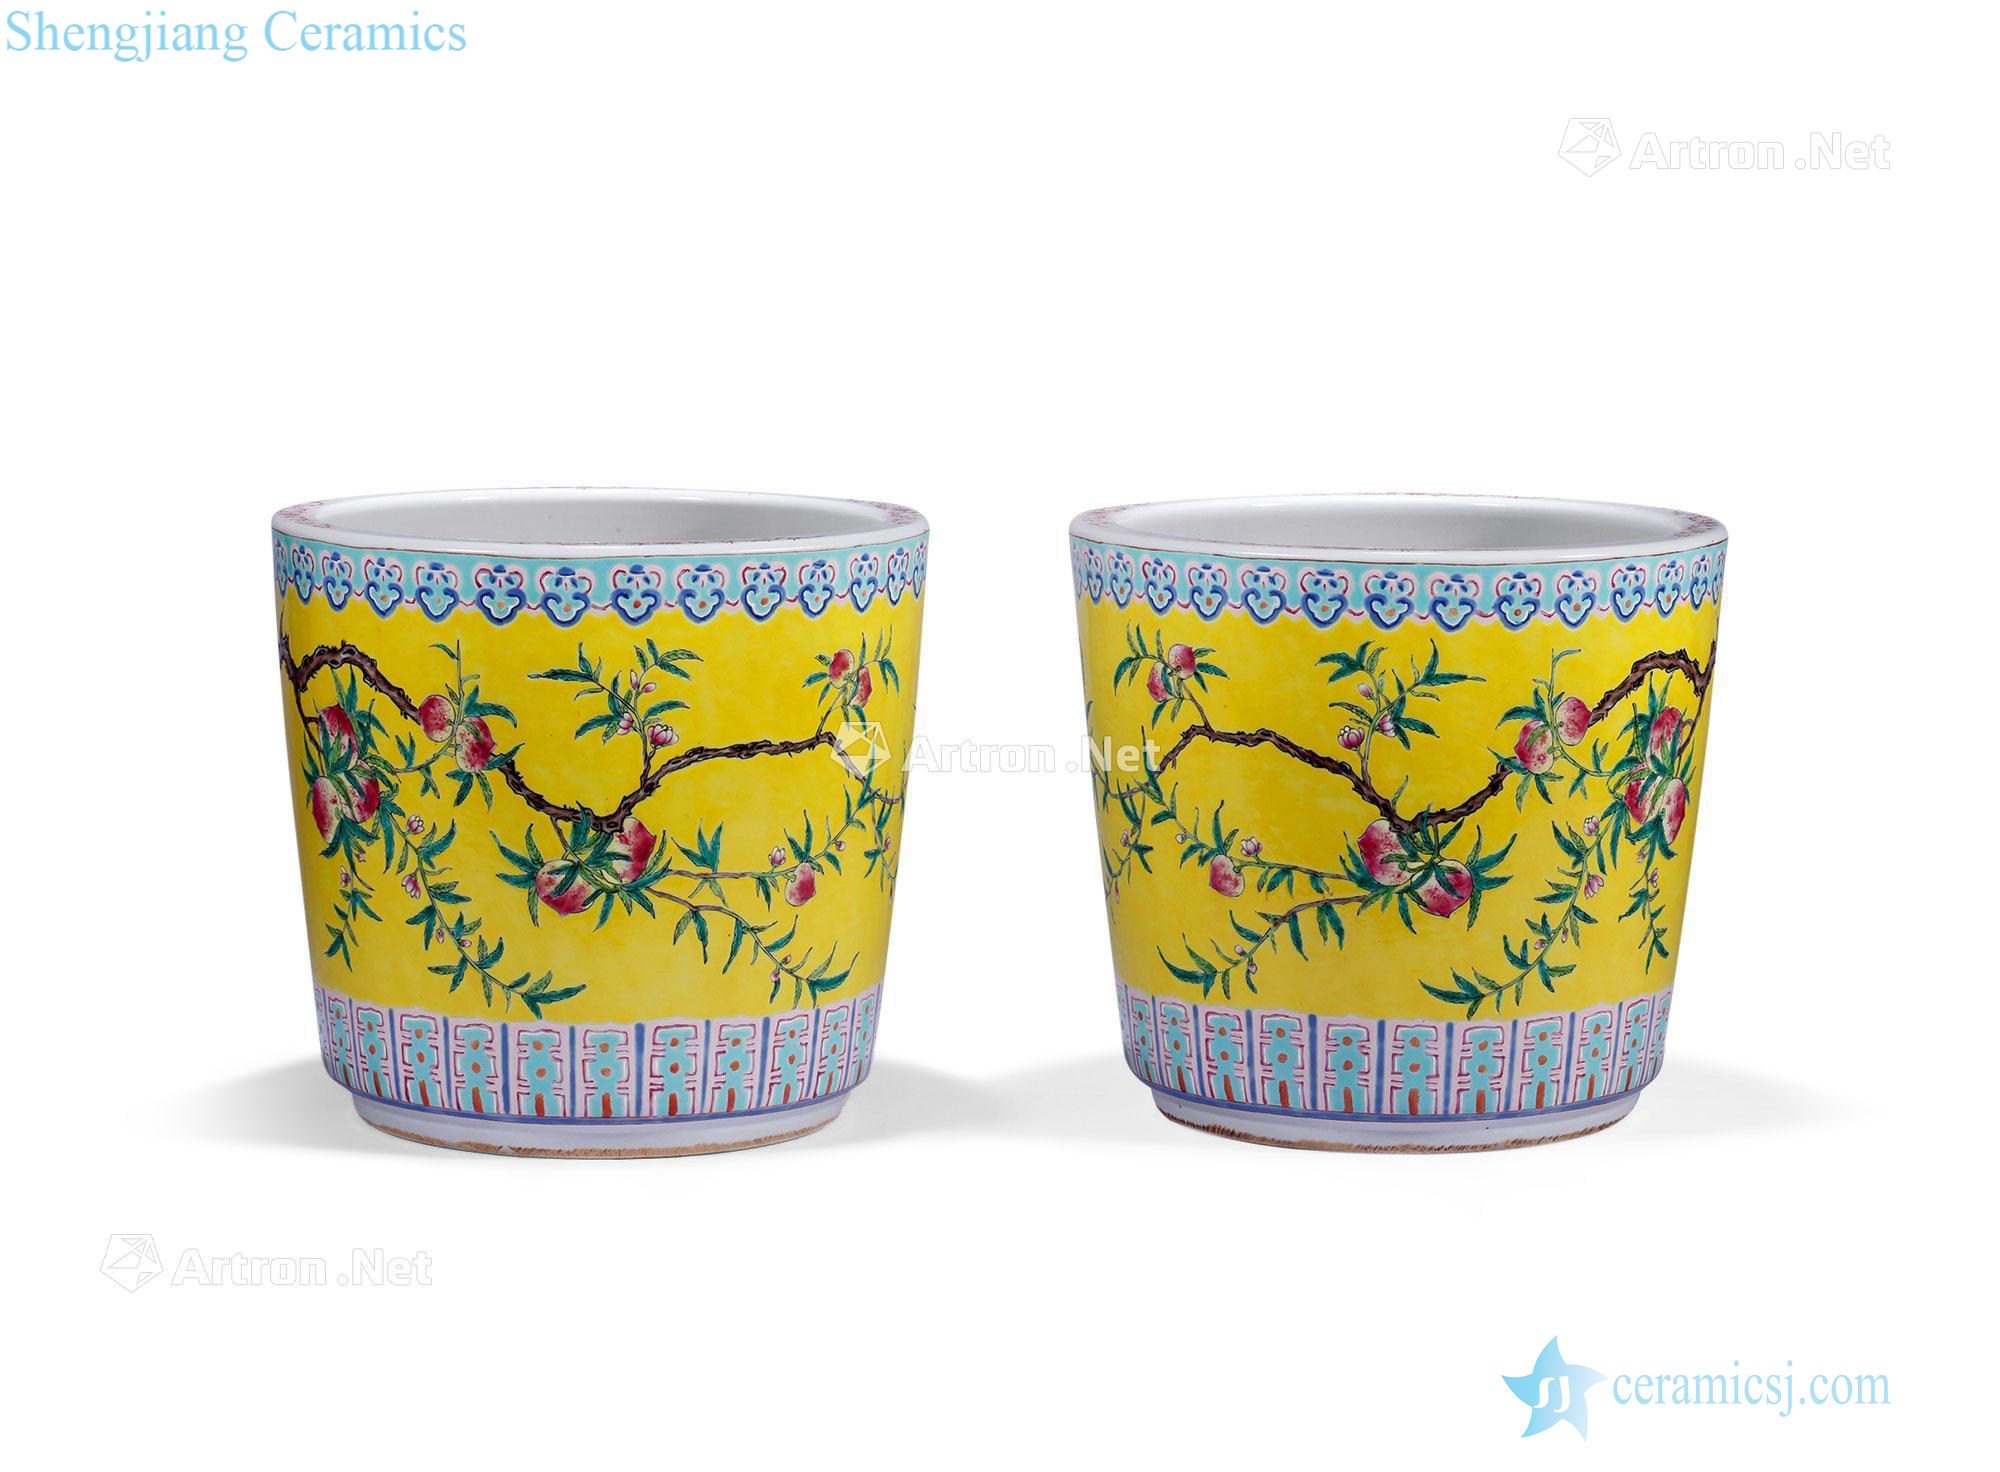 In late qing dynasty To pastel yellow flower grain flowerpot (a)